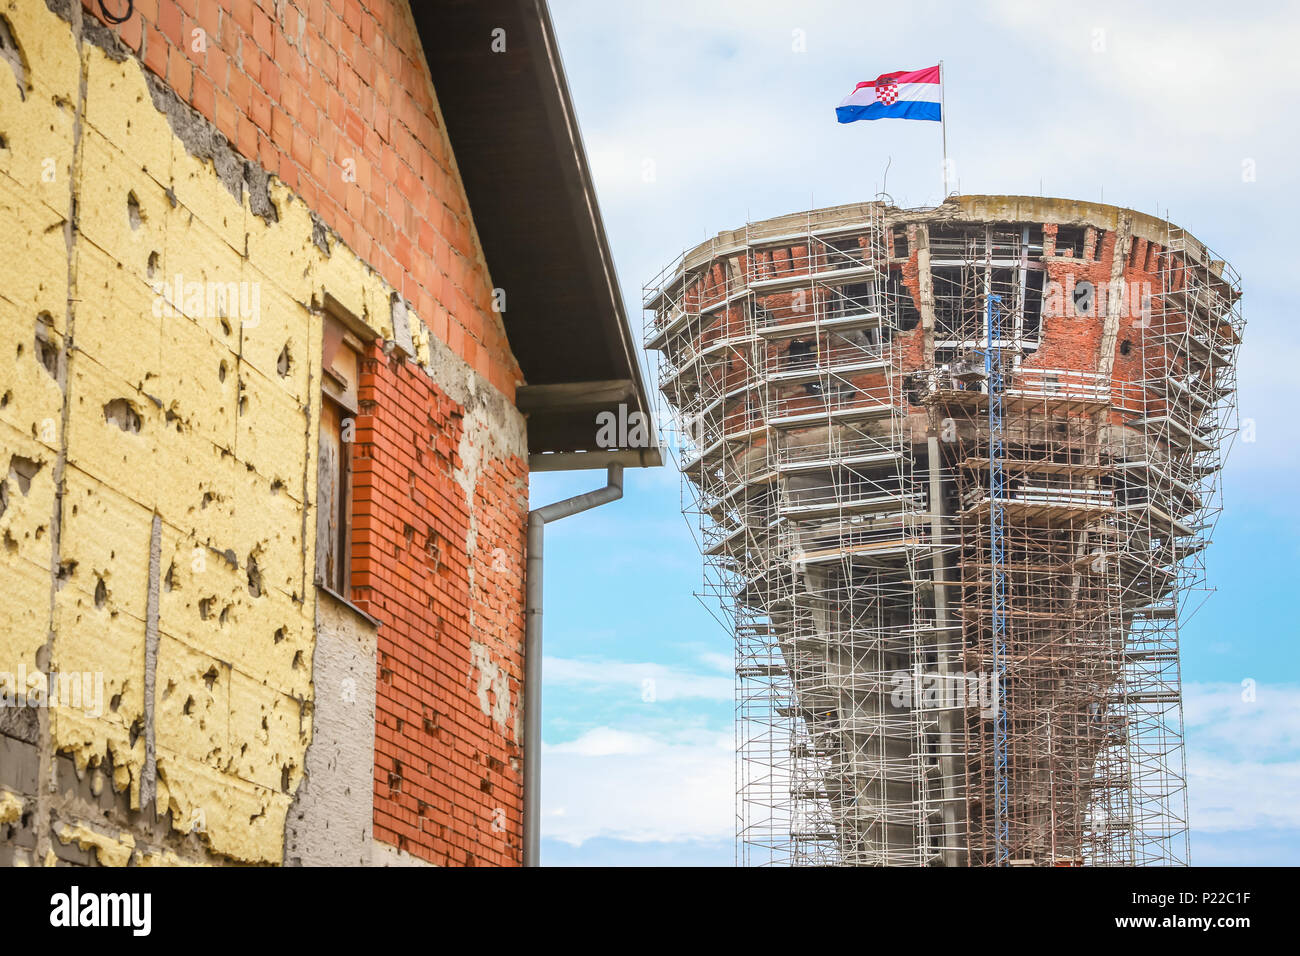 A view of the Vukovar water tower under reconstruction with a house damaged in war in Vukovar, Croatia. The water tower is a symbol of the city suffer Stock Photo